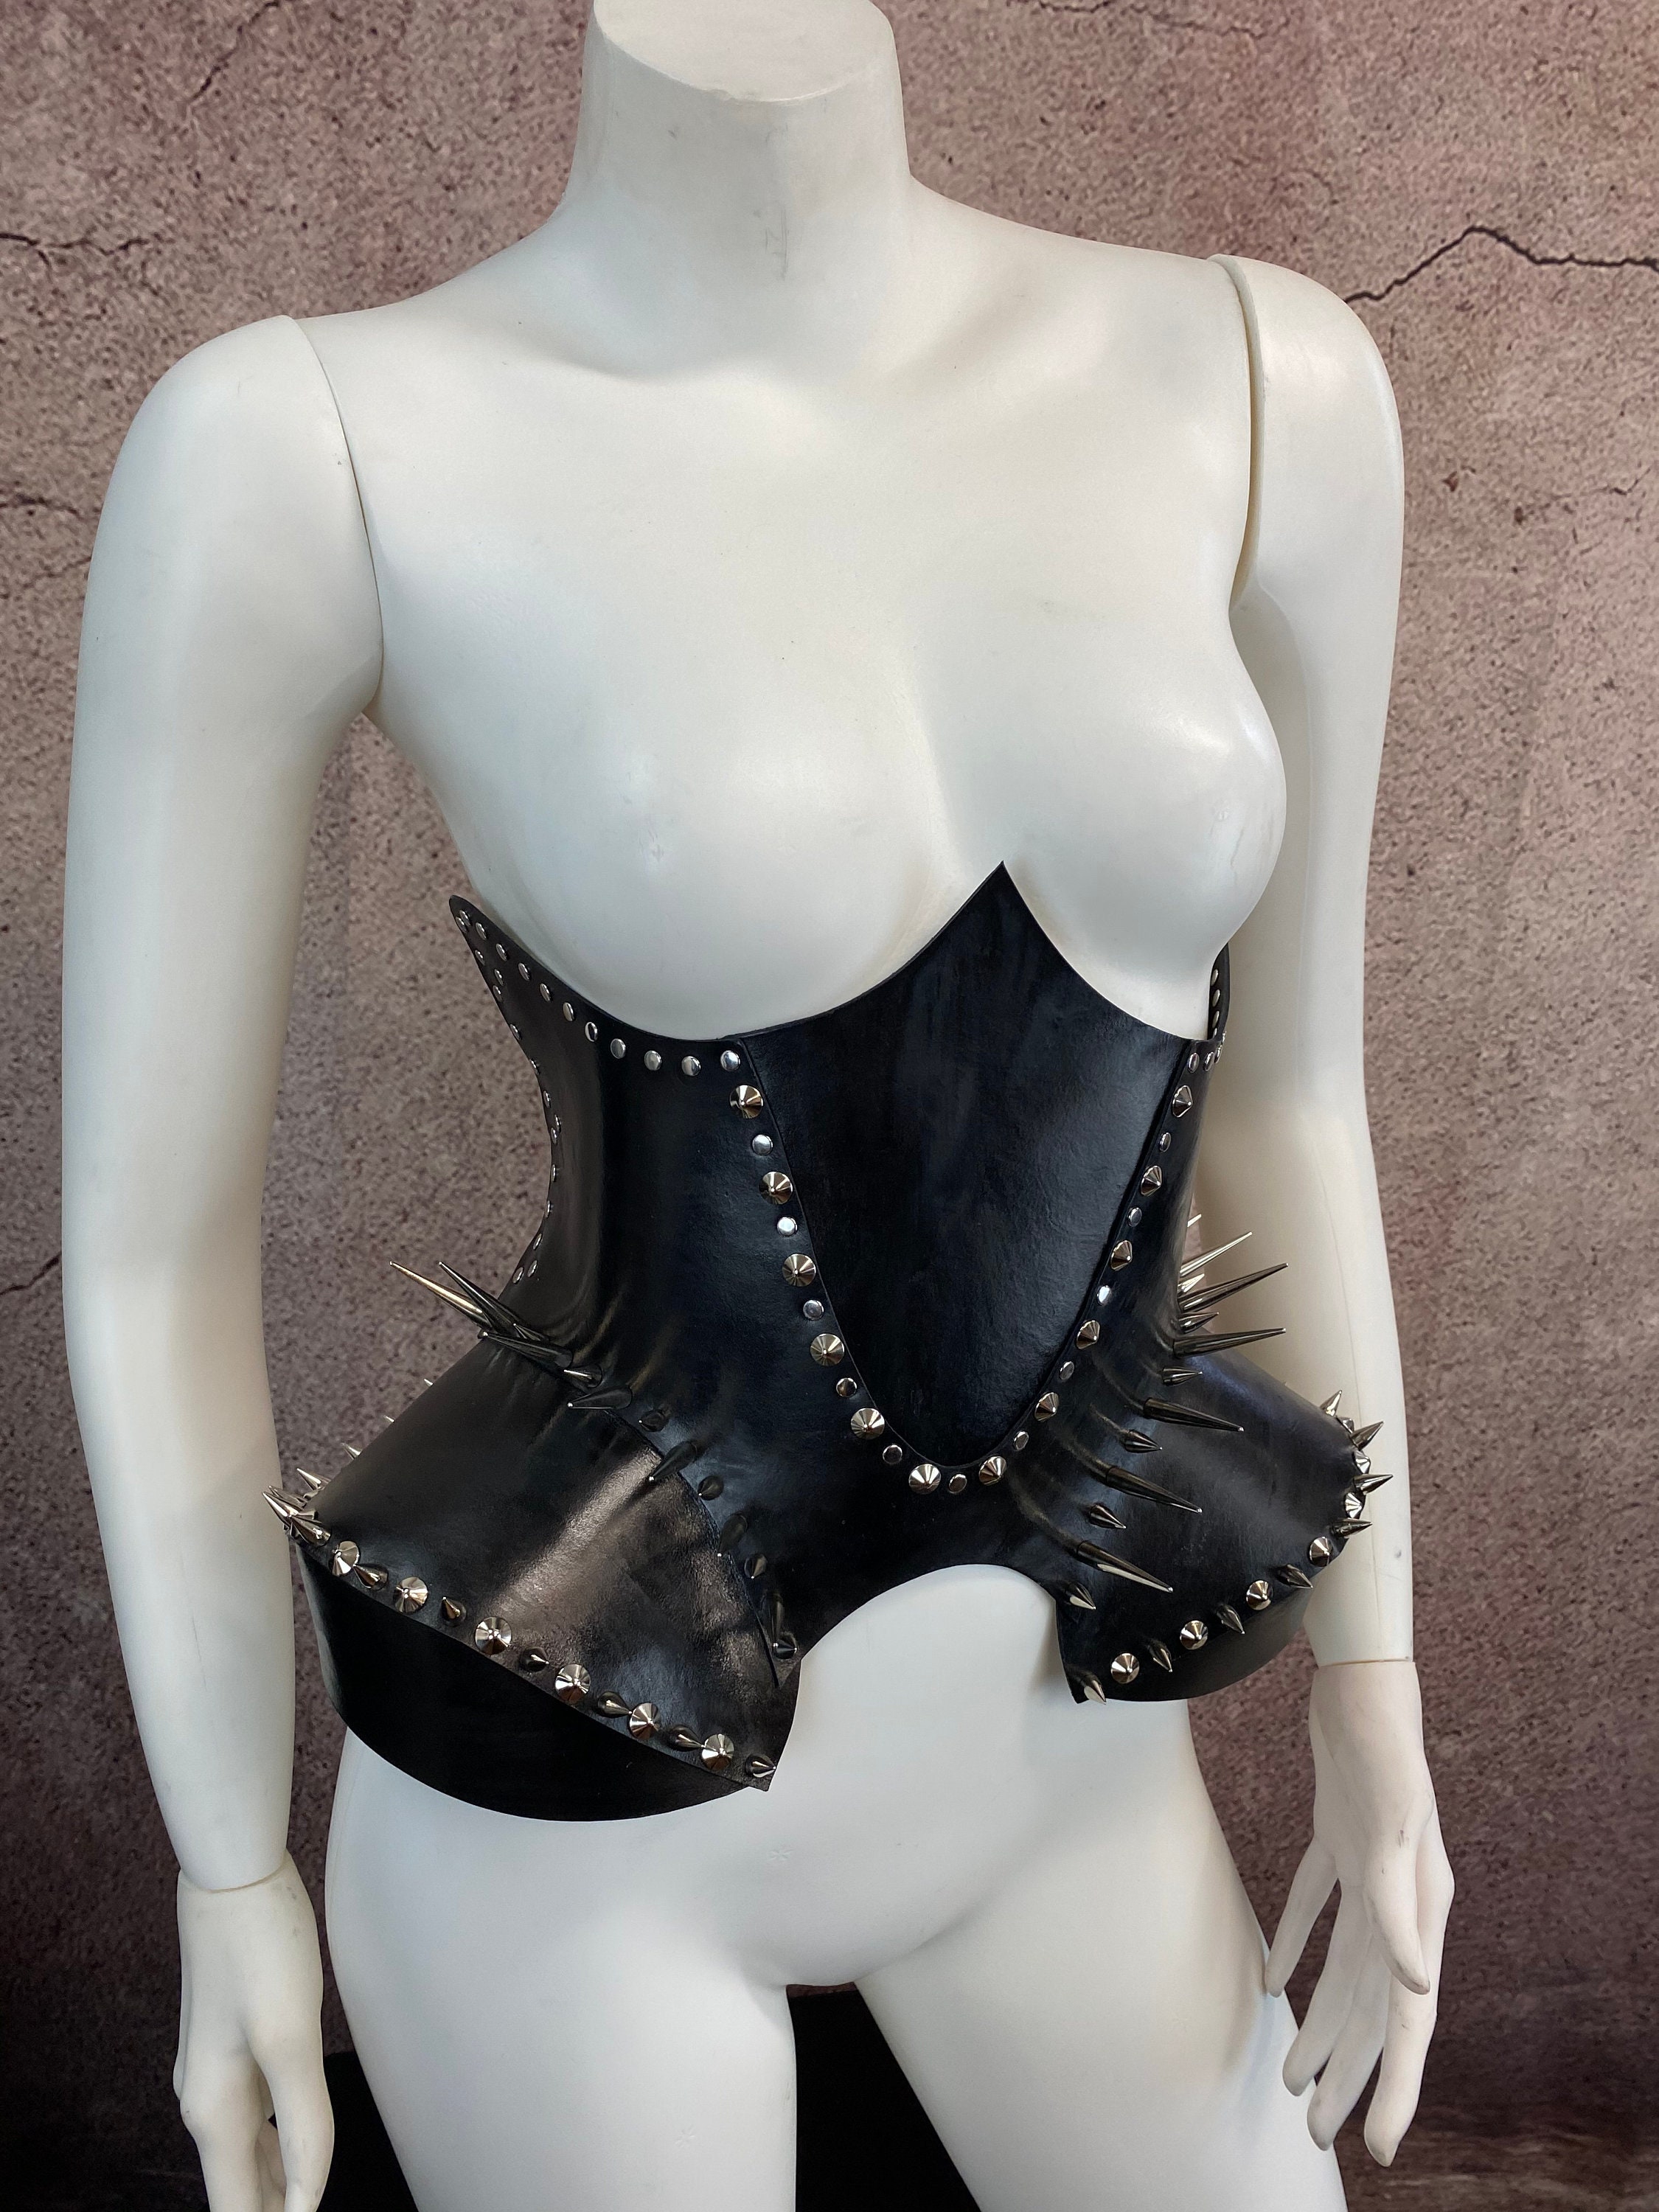 The Stigmata Cupless Corset, Leather Fashion Corset With Spikes